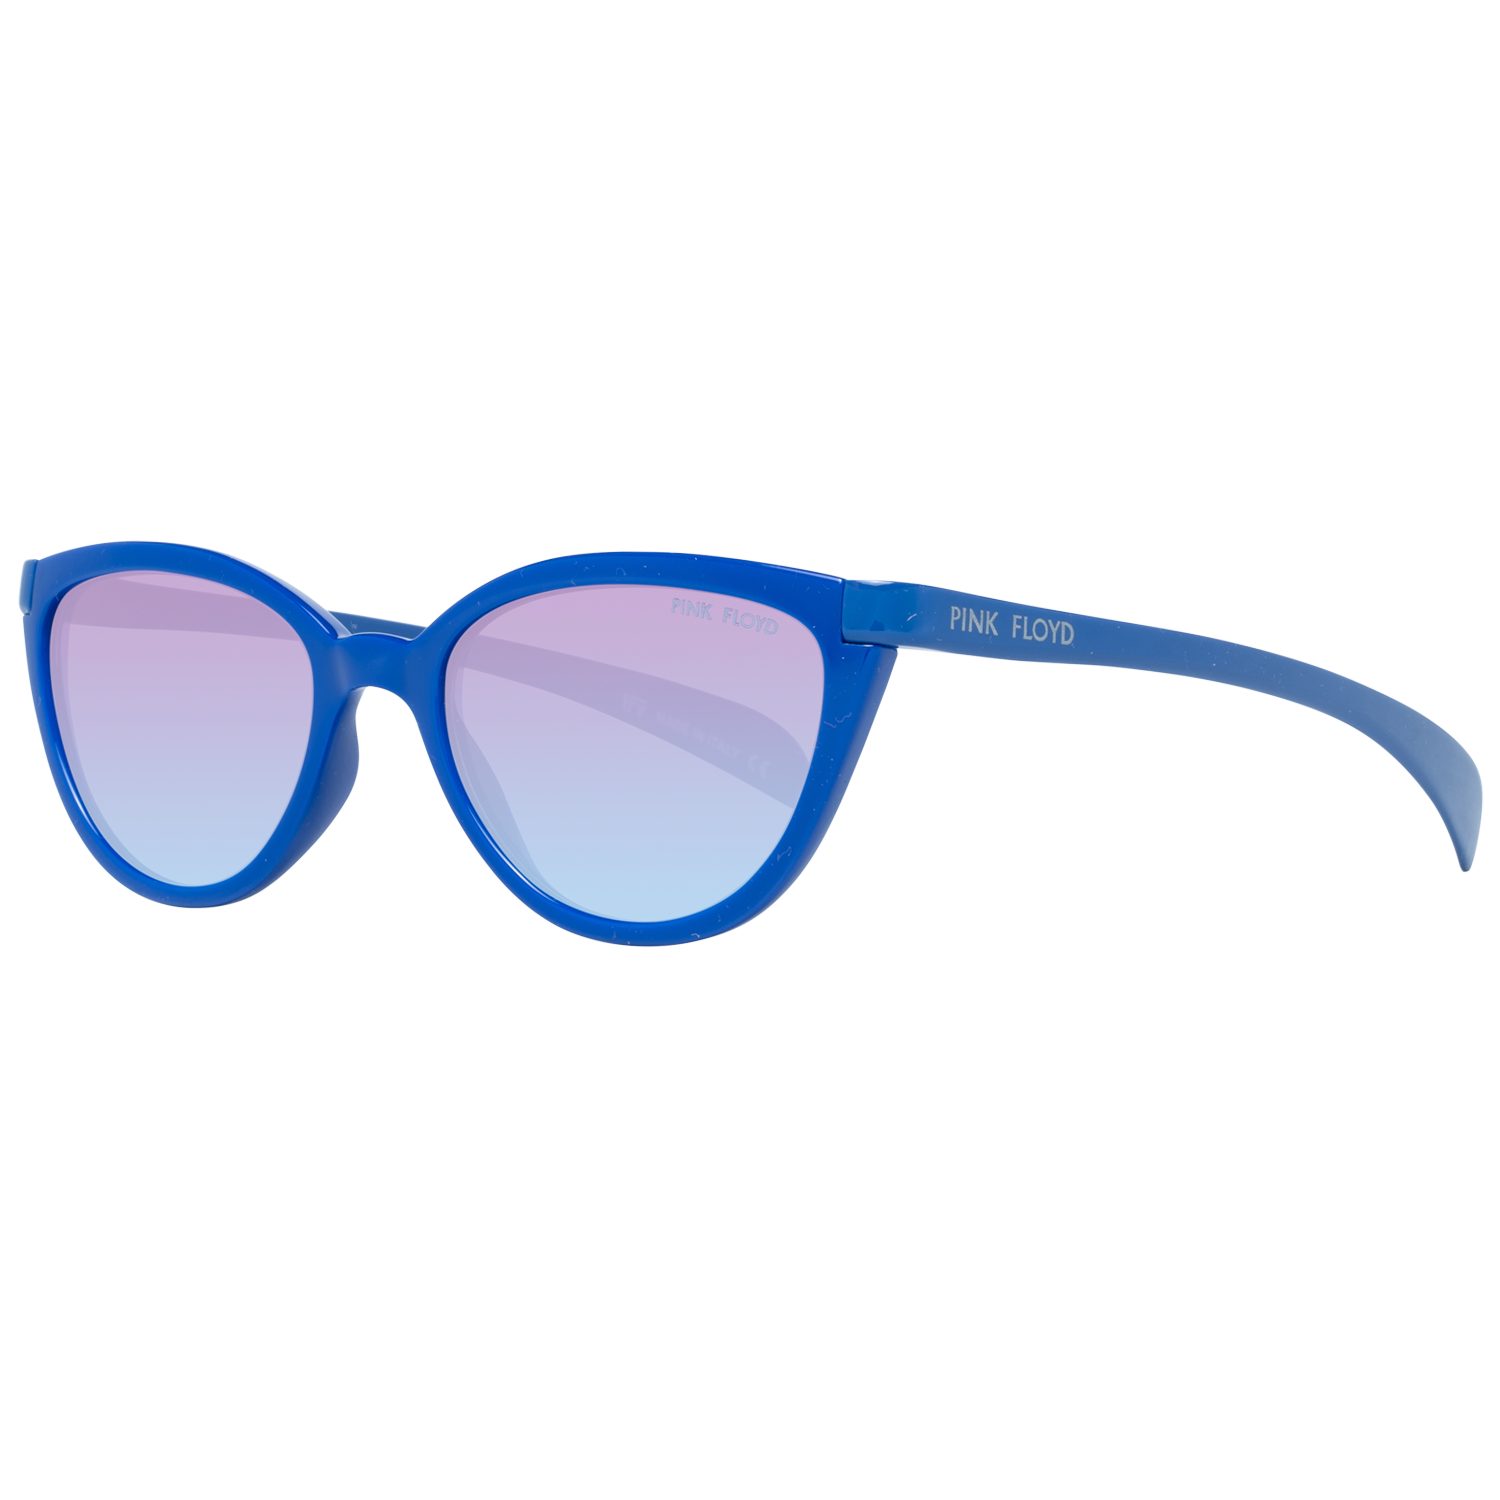 Try Cover Change Sonnenbrille TS501 5004